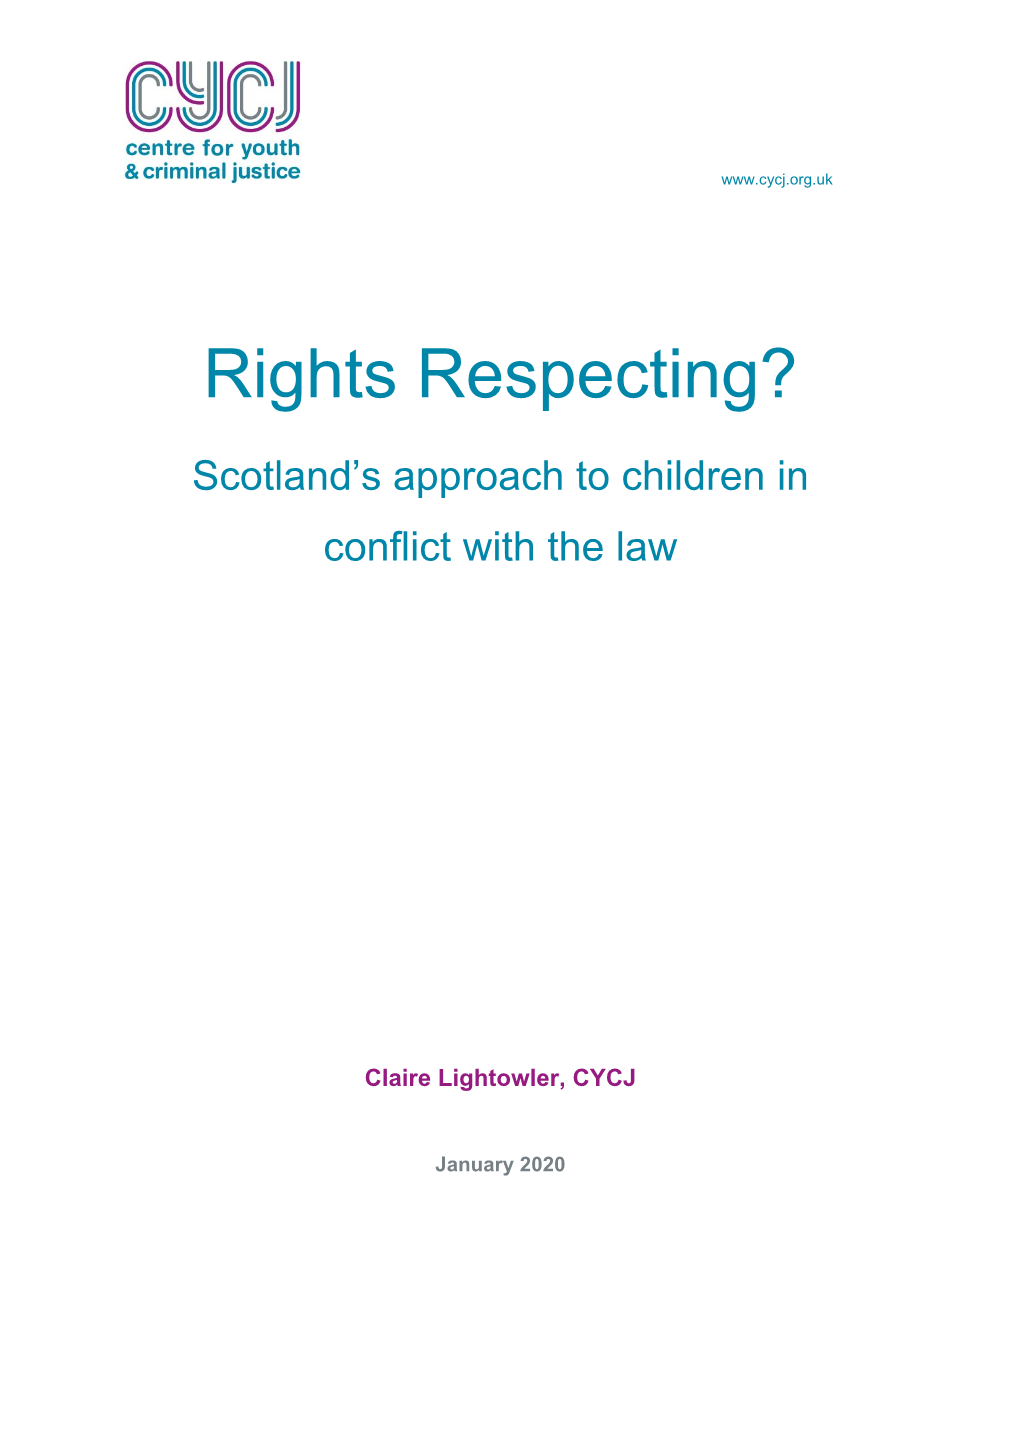 'Rights Respecting? Scotland's Approach to Children in Conflict With